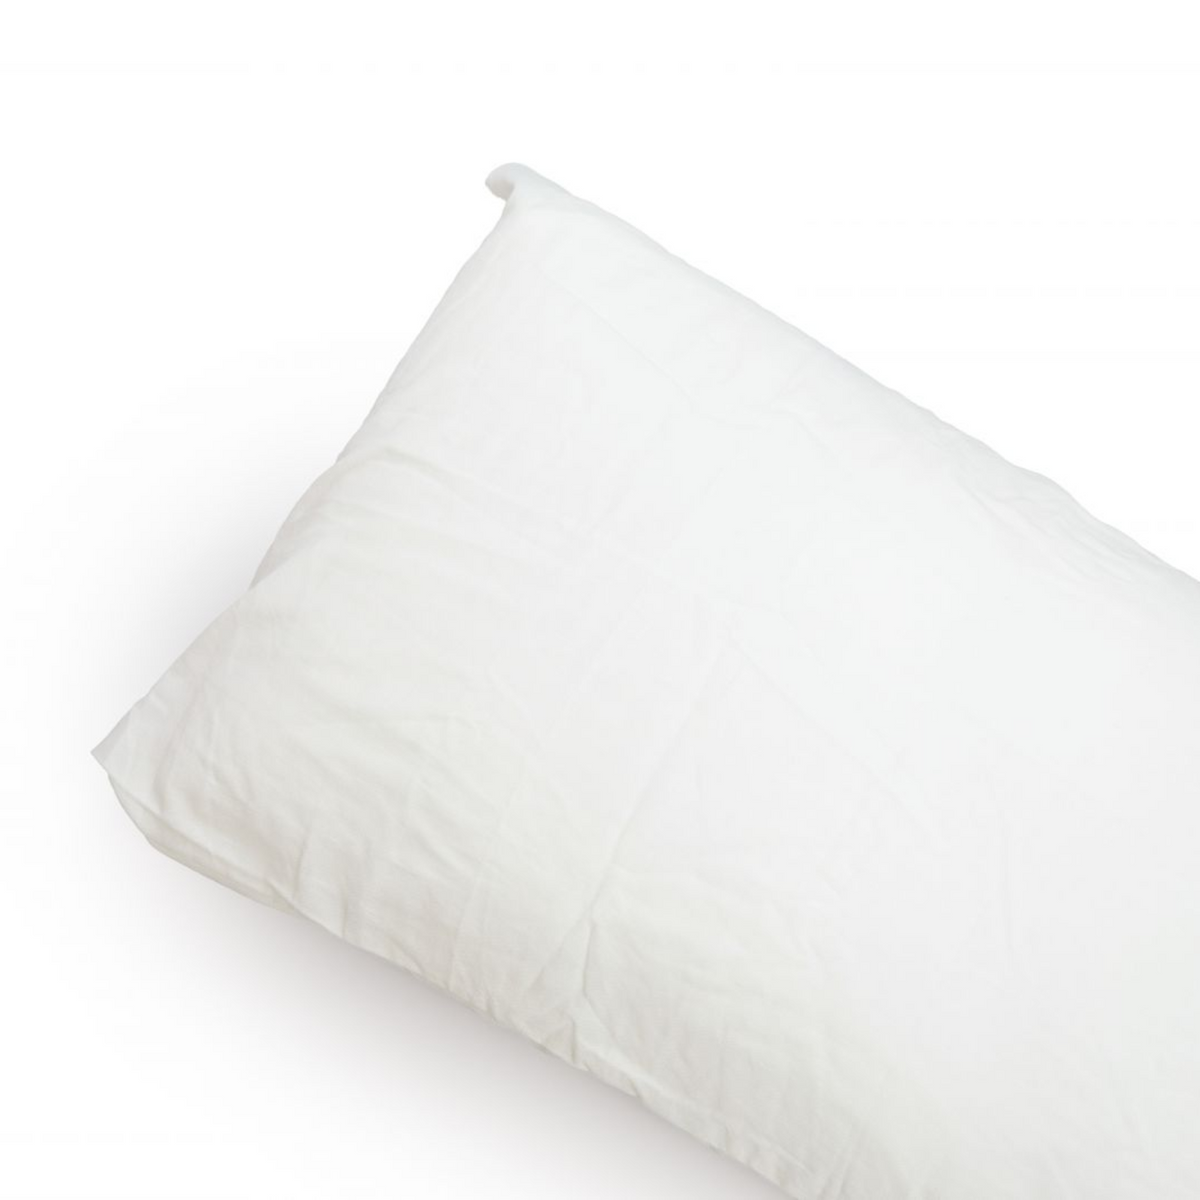 Ladies Pillow Linen Pillowcase -Breathable Cooling Machine Washable - Gets Softer with Every Wash - Linen Pillow Case (White)